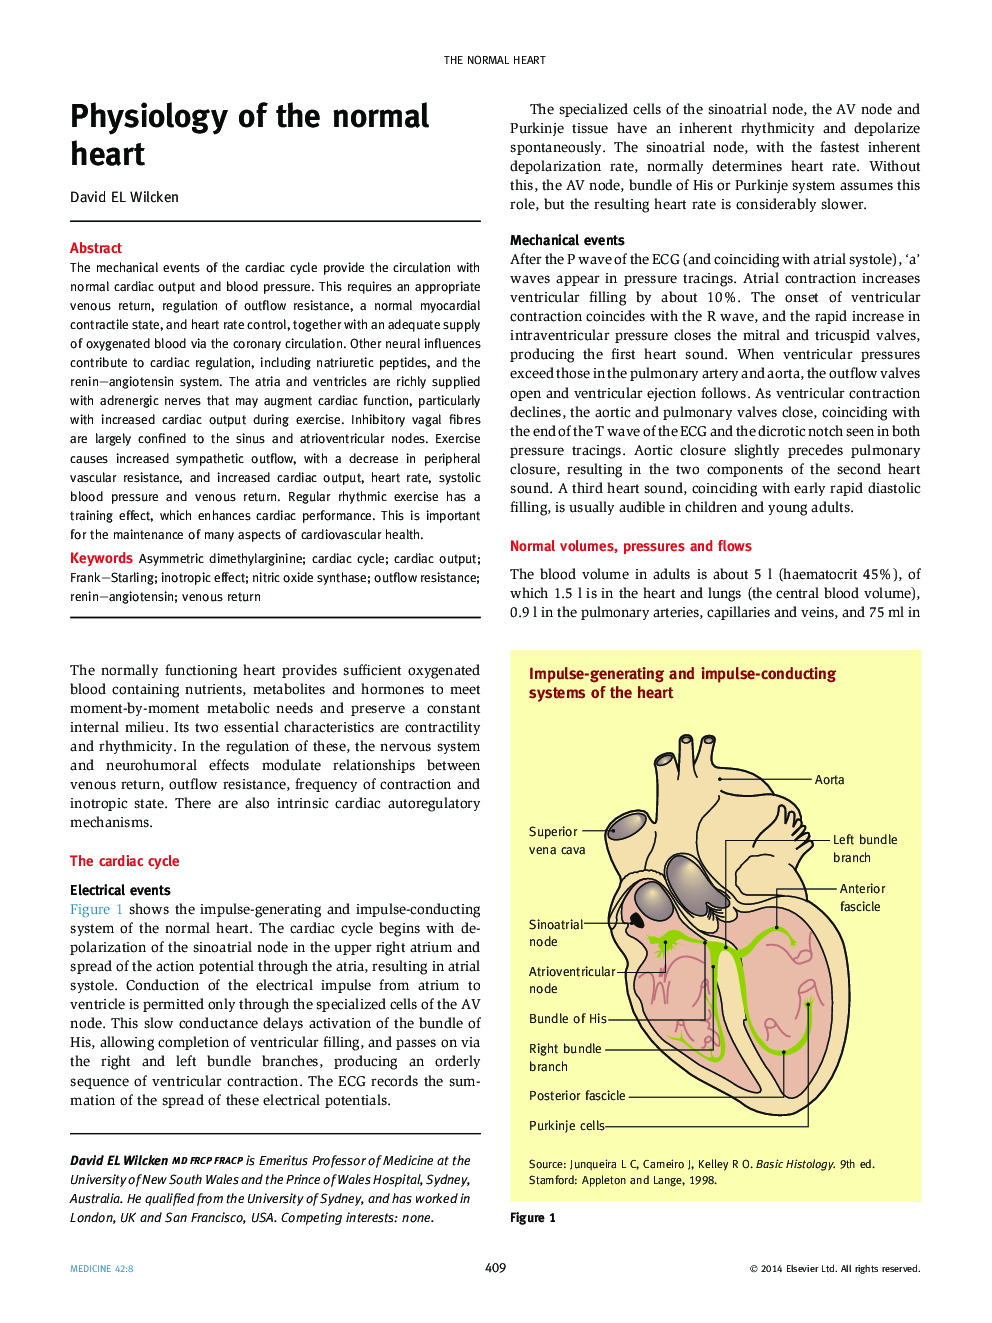 Physiology of the normal heart